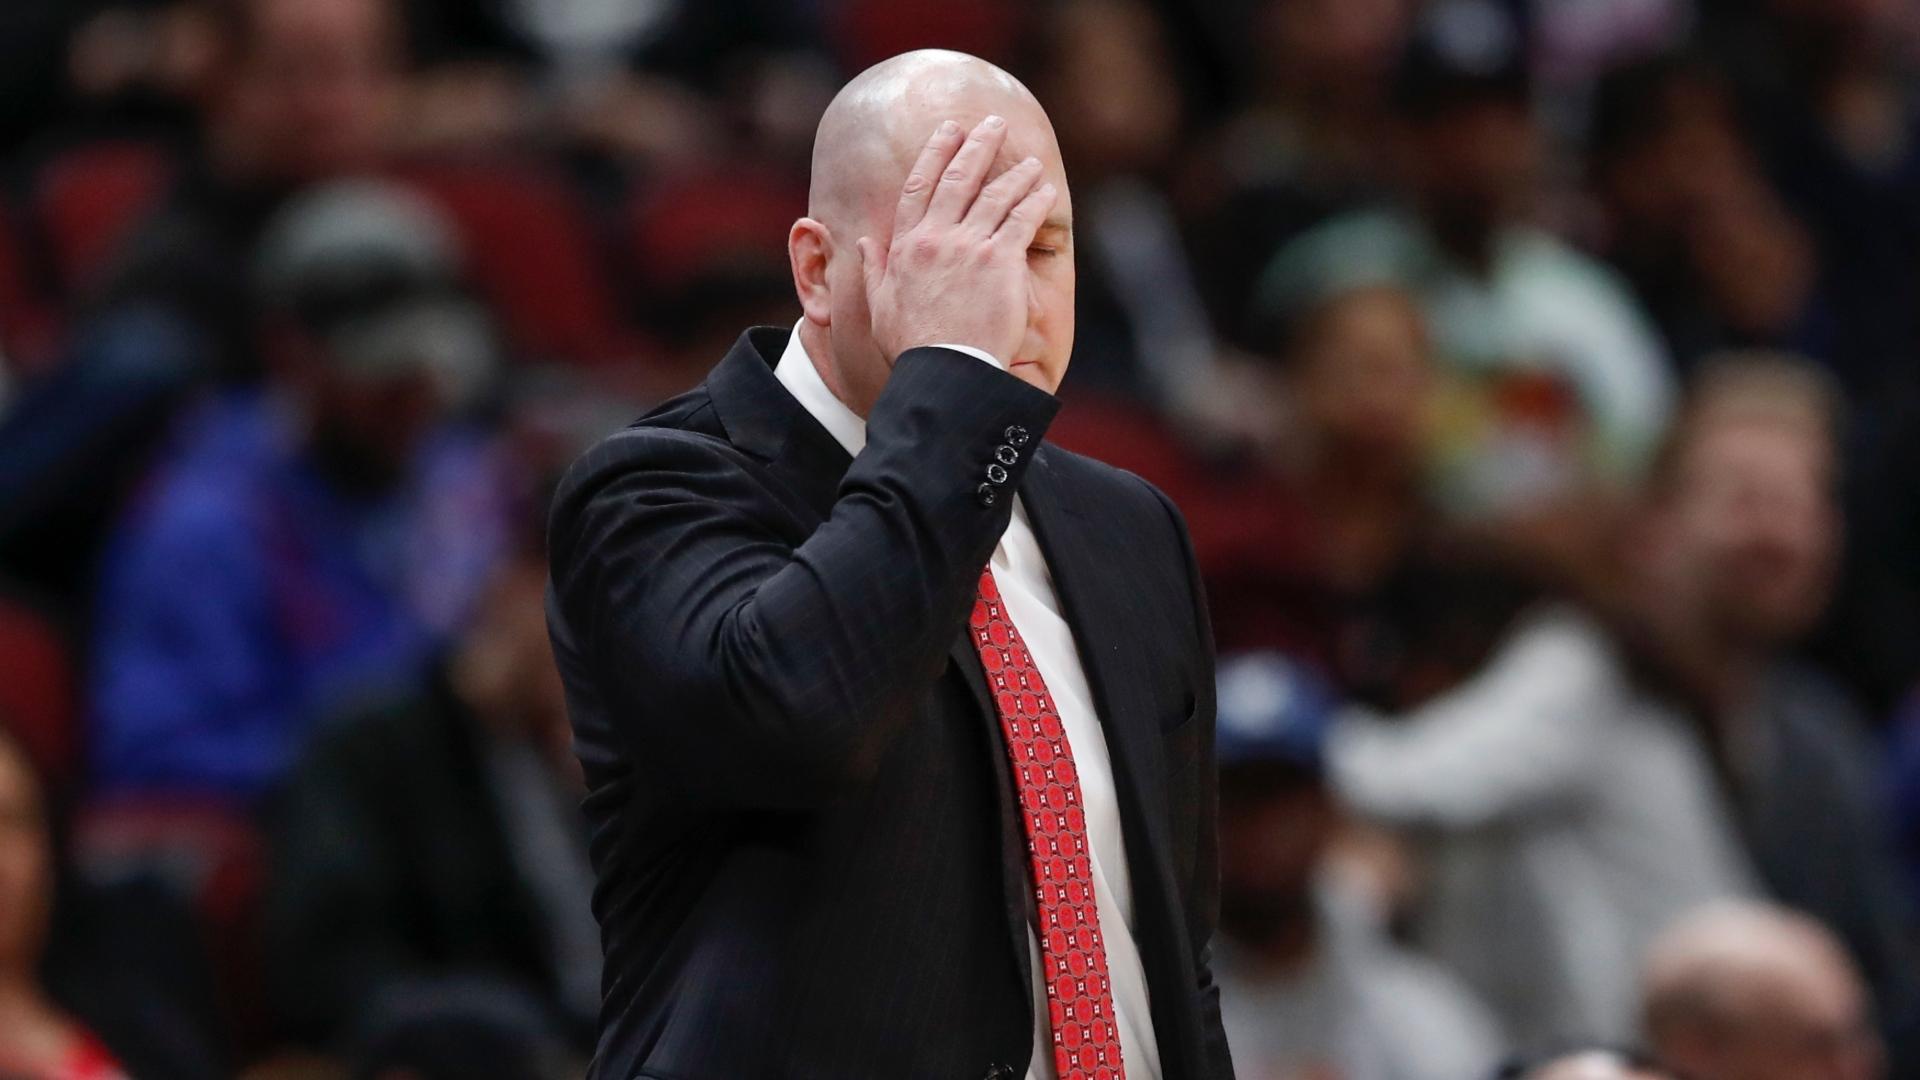 In this Tuesday, April 9, 2019, file photo, Chicago Bulls head coach Jim Boylen reacts during the second half of an NBA basketball game against the New York Knicks, in Chicago. (AP Photo / Kamil Krzaczynski, File)